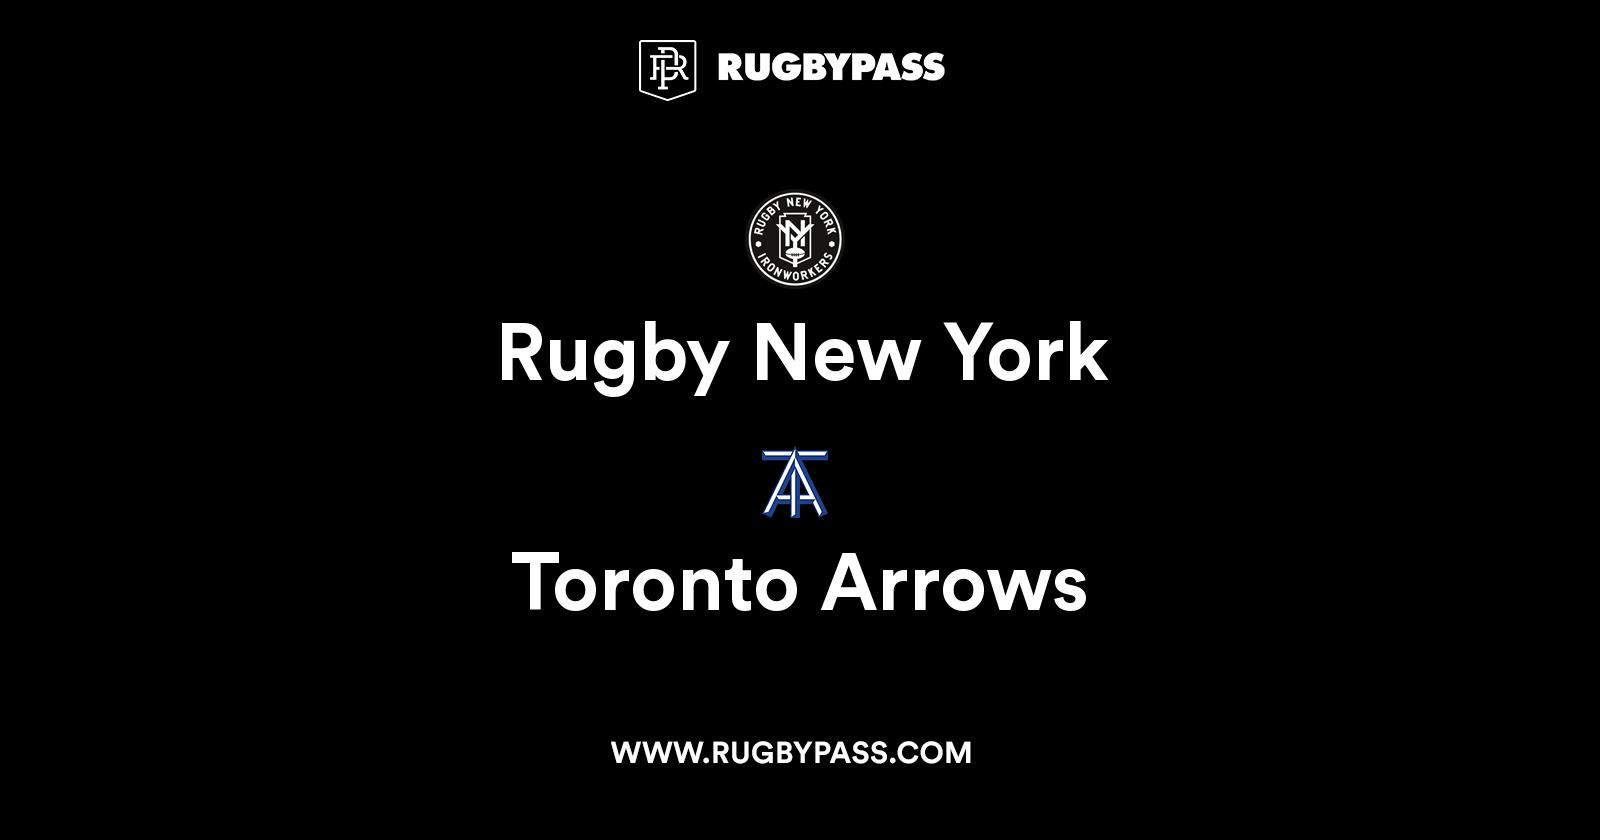 Rugby New York vs Toronto Arrows Live and Latest Rugby Union Scores and Results RugbyPass